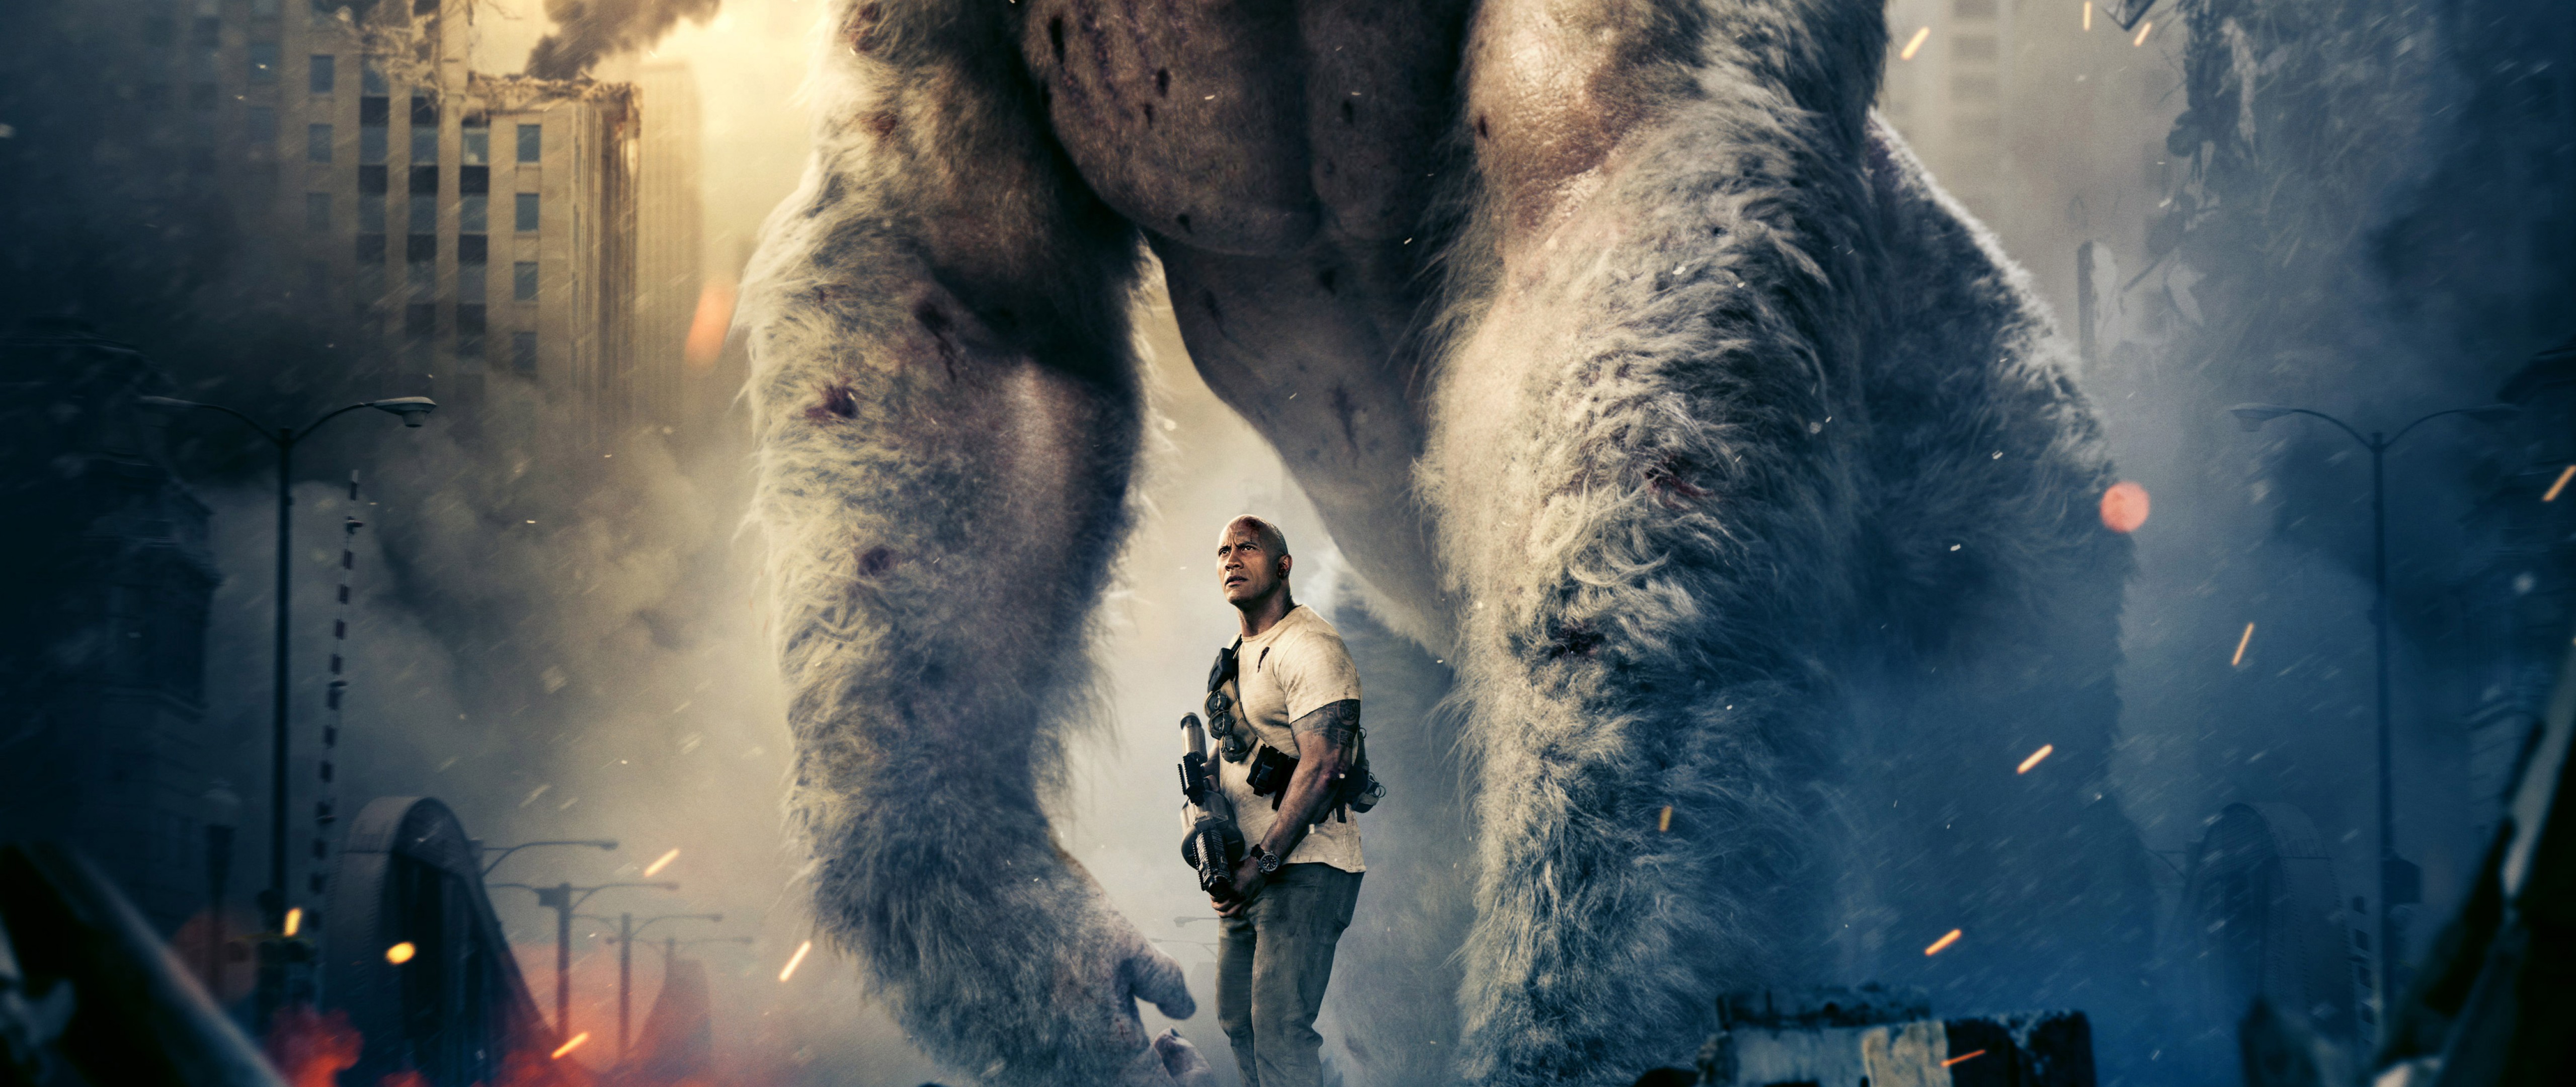 Download Rampage 2018 FUll Hd Wallpaper for Desktop and Mobiles